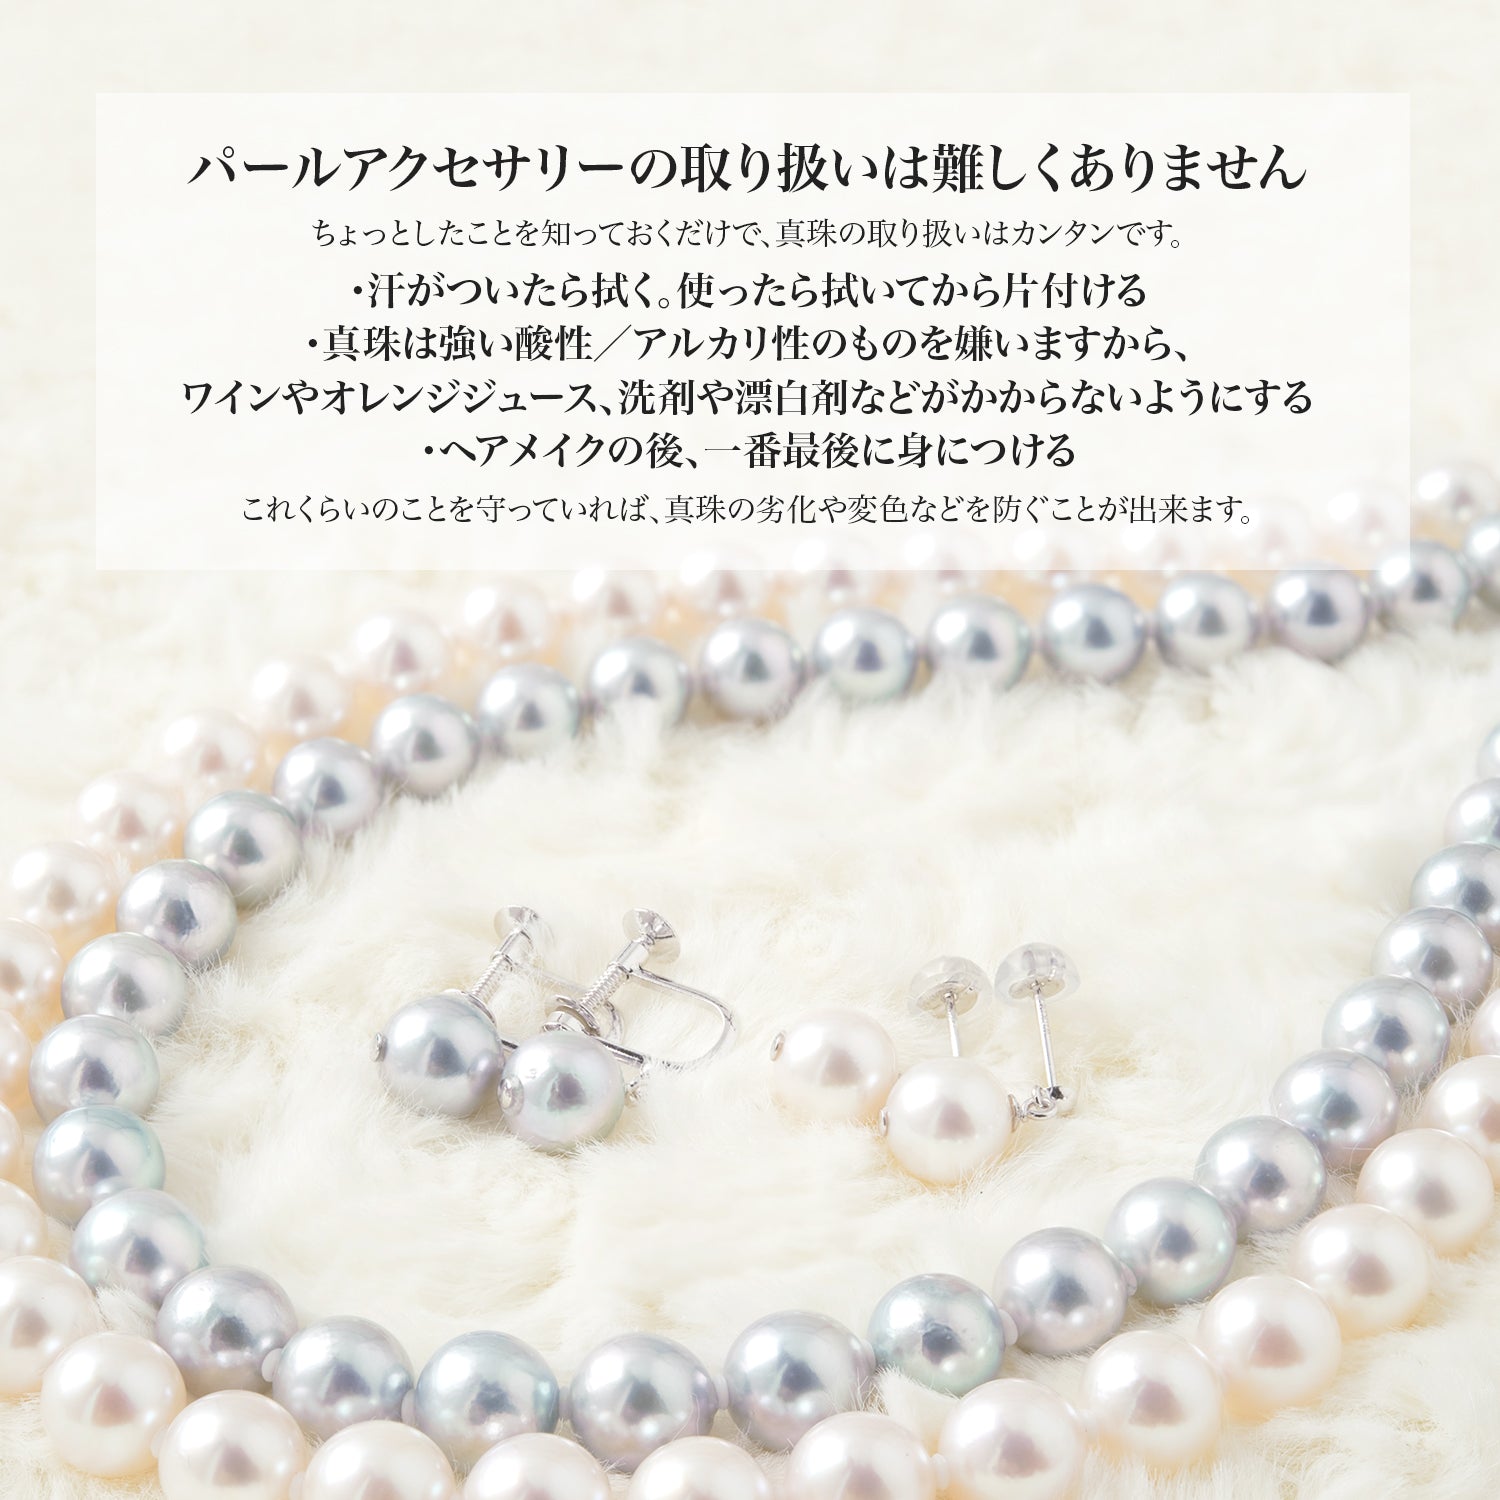 Hanadama Pearl Formal Necklace Set of 2 [7.5-8.0mm] (Earrings Included) Formal Set with Certificate of Authenticity and Storage Case for Ceremonial Occasions